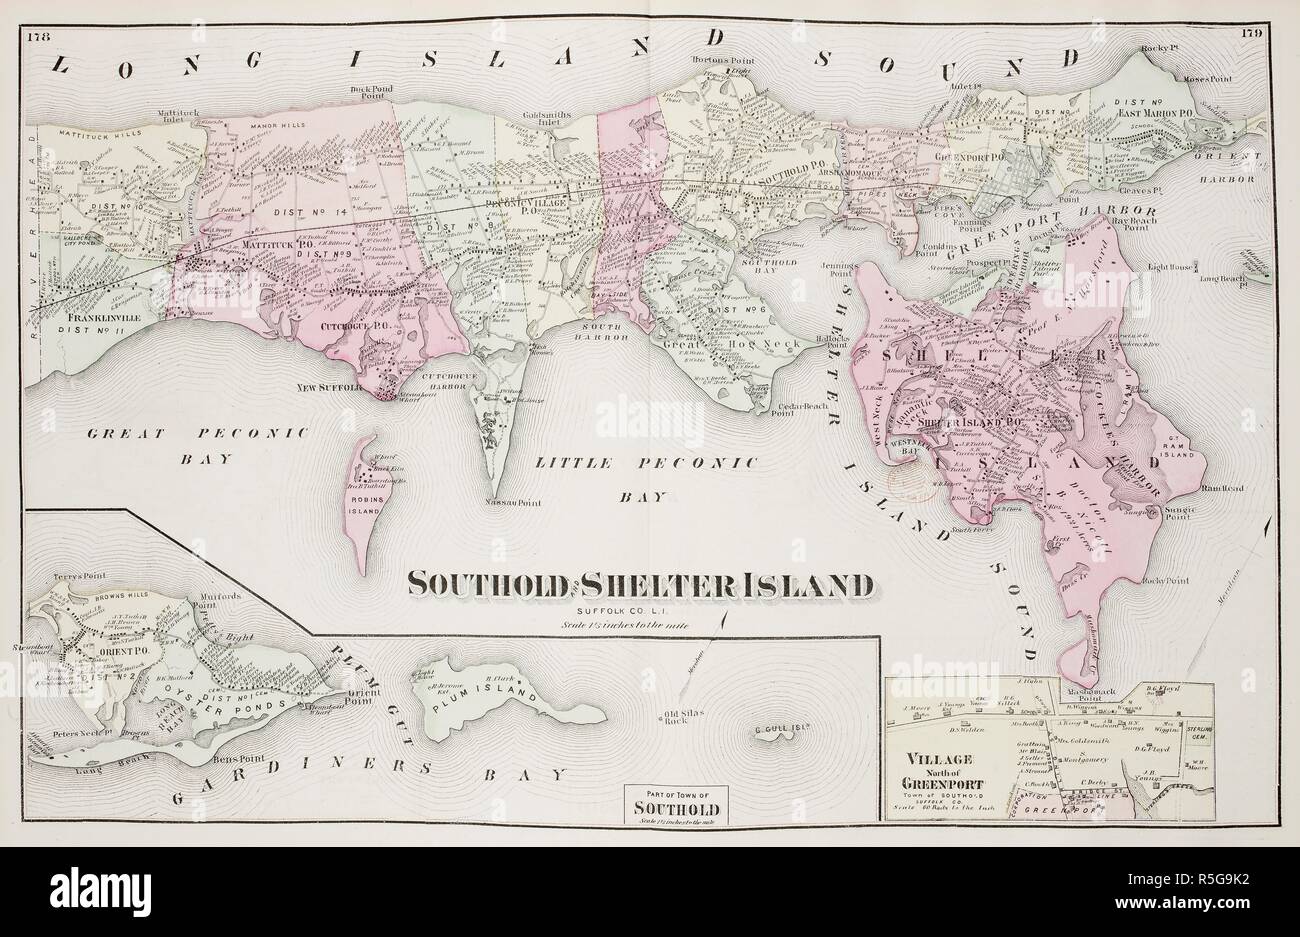 Map of Southold Shelter Island on Long Island New York in the United States. . Atlas of Long Island, New York. From recent and actual Surveys and Records under the superintendence of F.W. Beers. New York, 1873. Source: Maps.33.d.17 ff.178-179. Language: English. Stock Photo